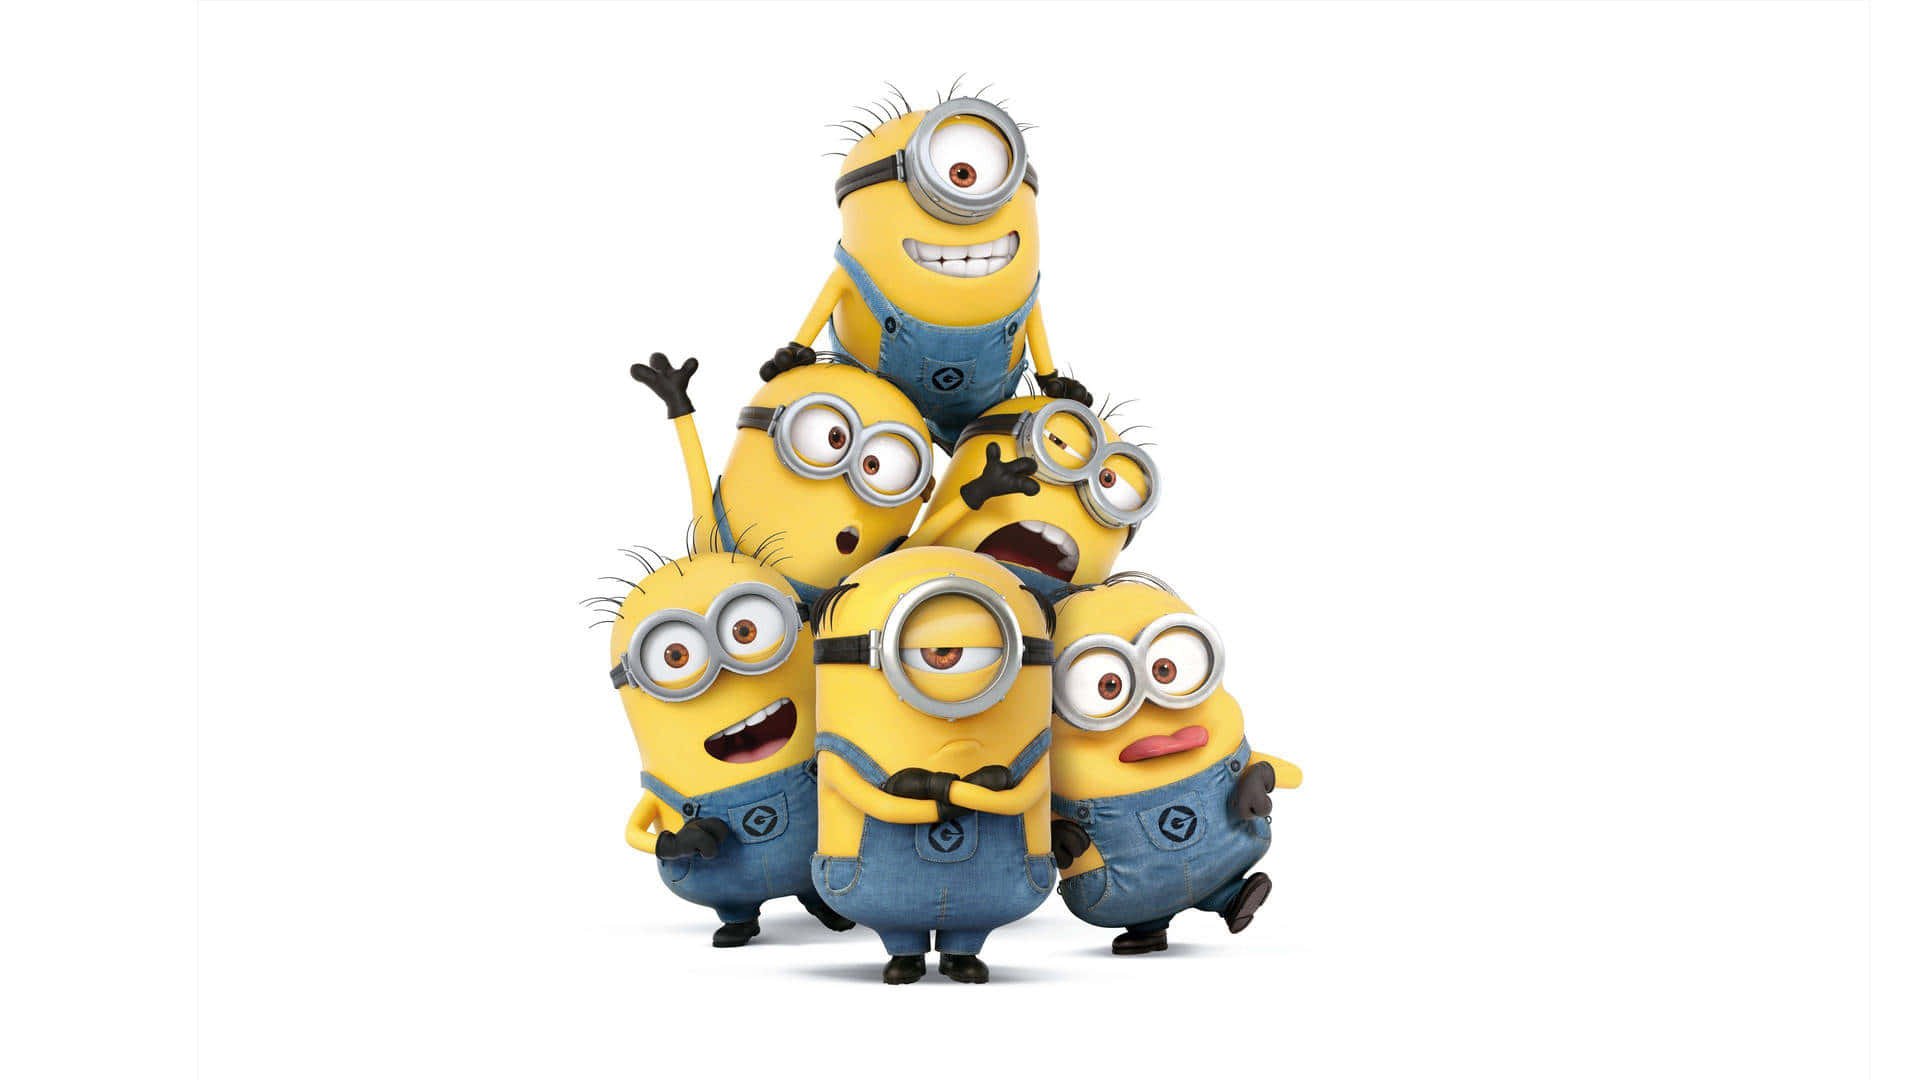 Three fun Minions hanging out